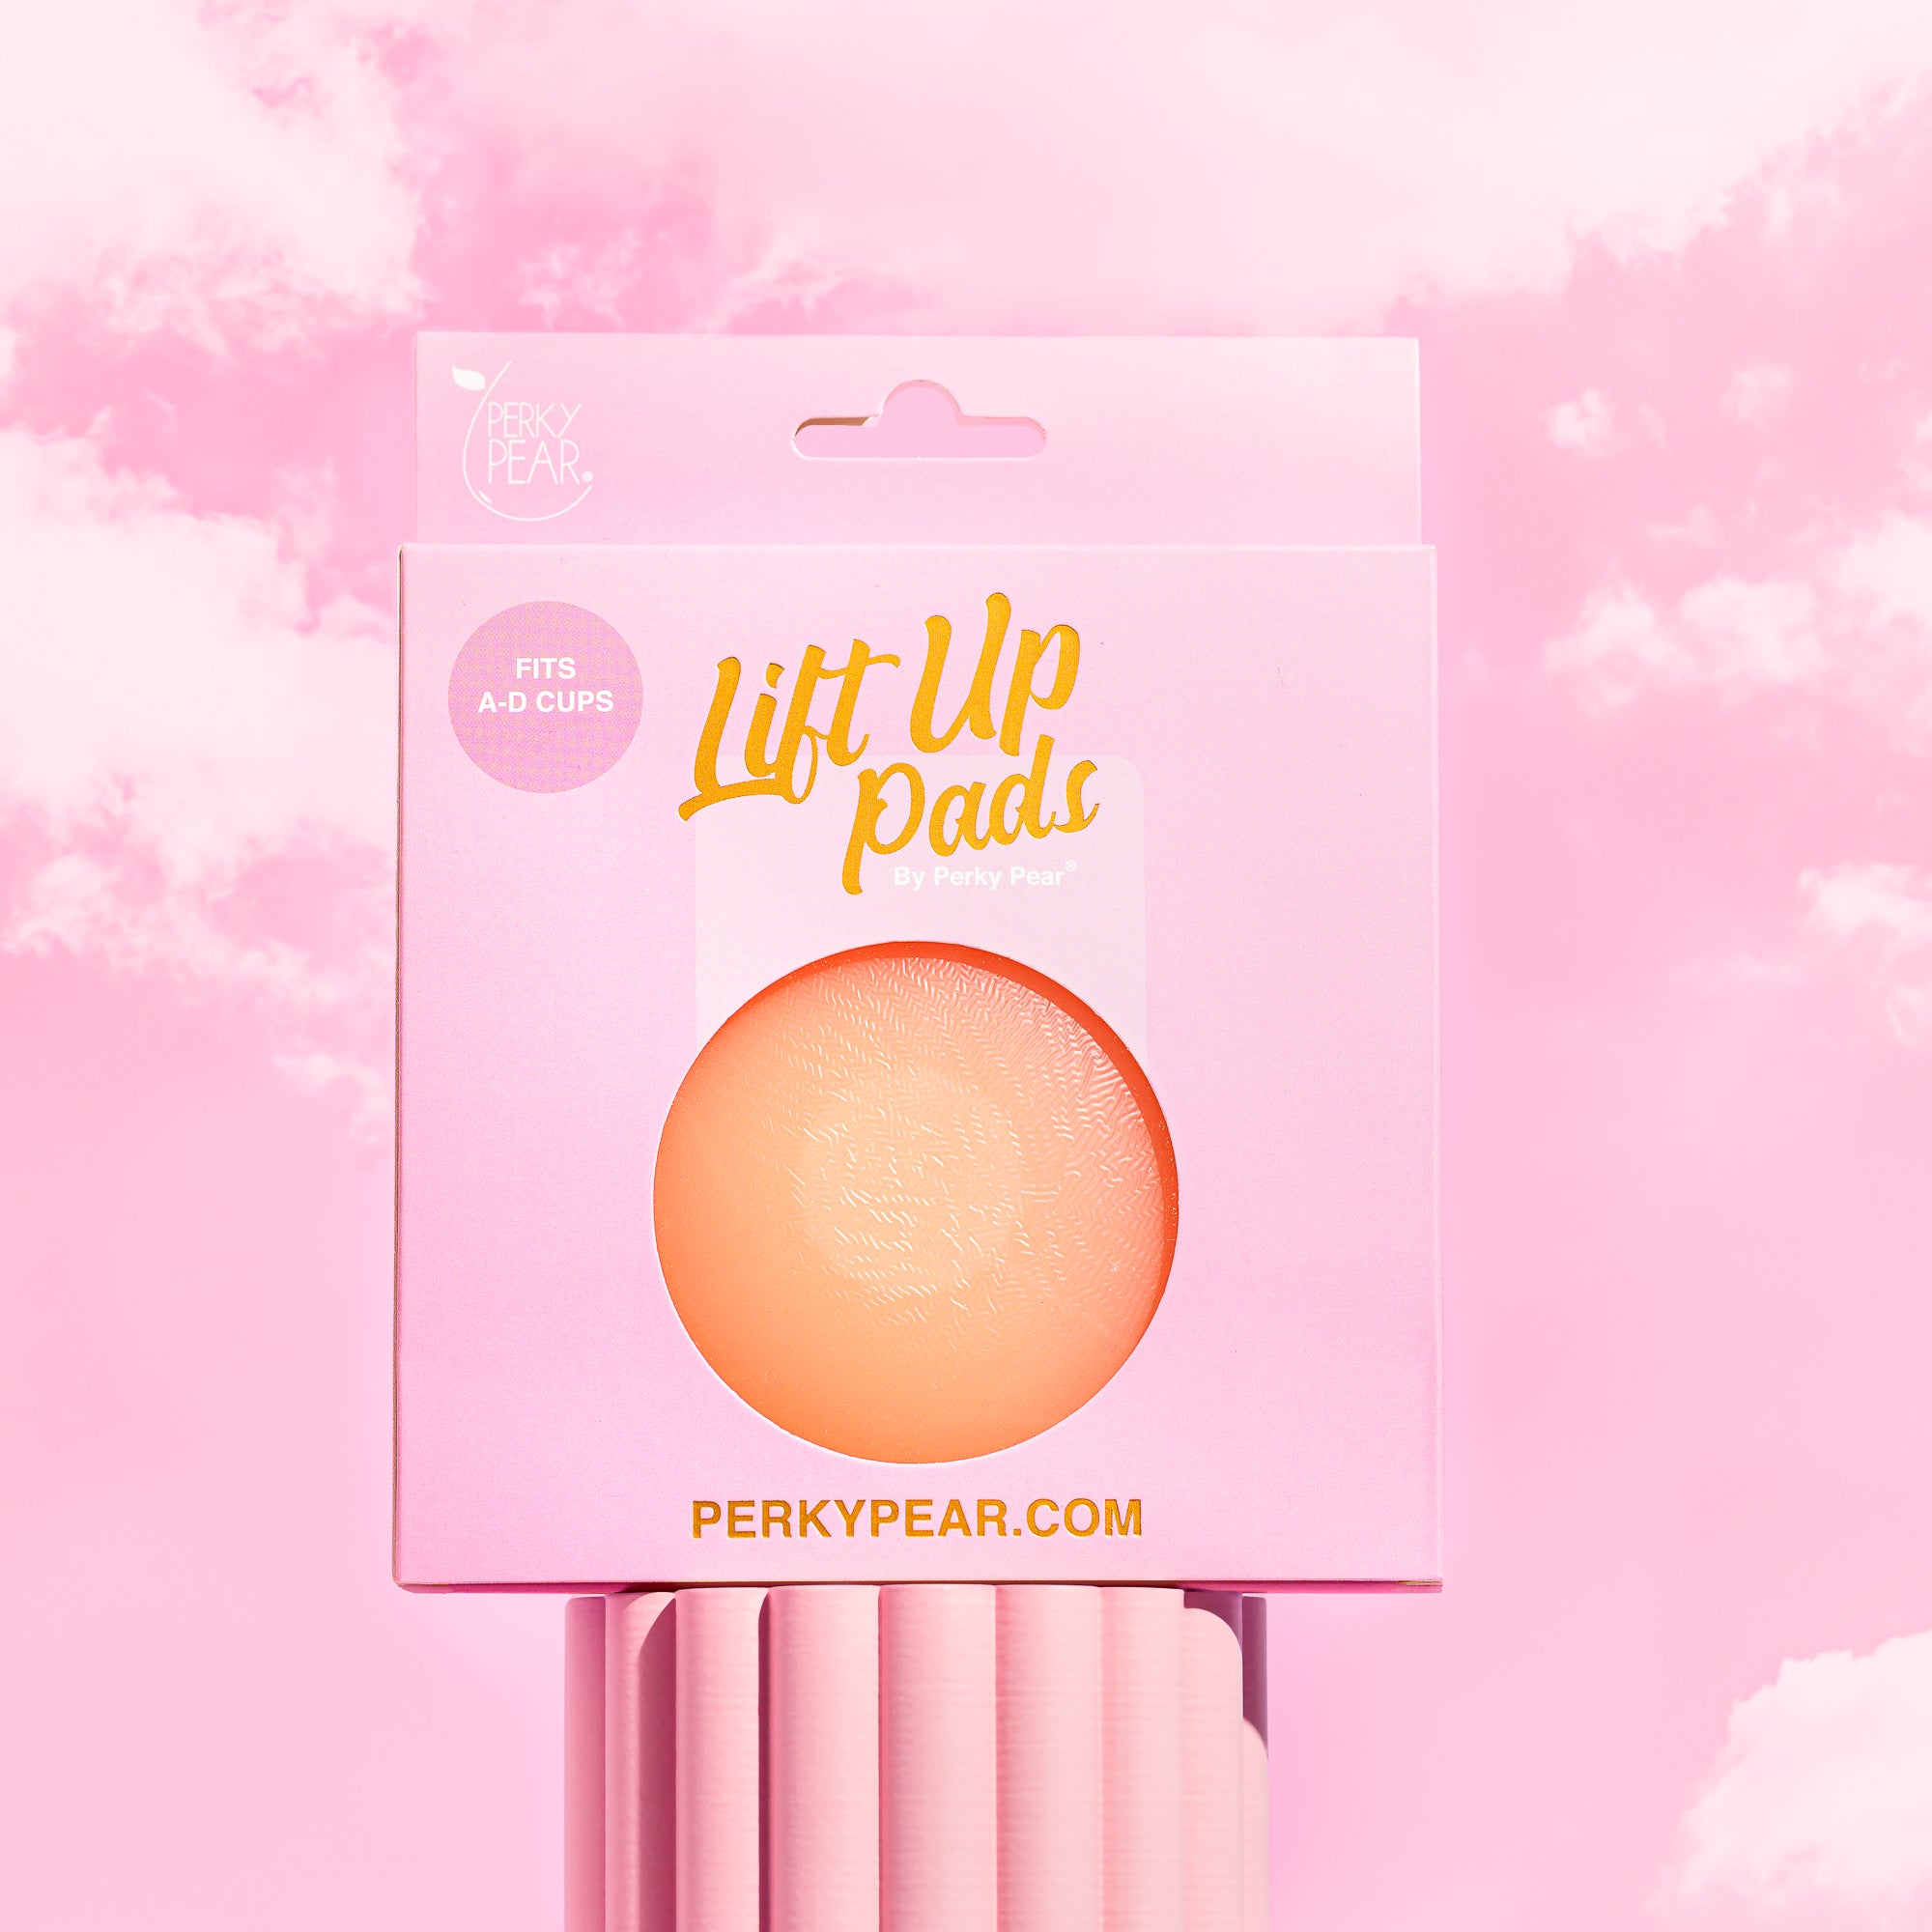 5 x Packs of Lift Up Pads By Perky Pear®